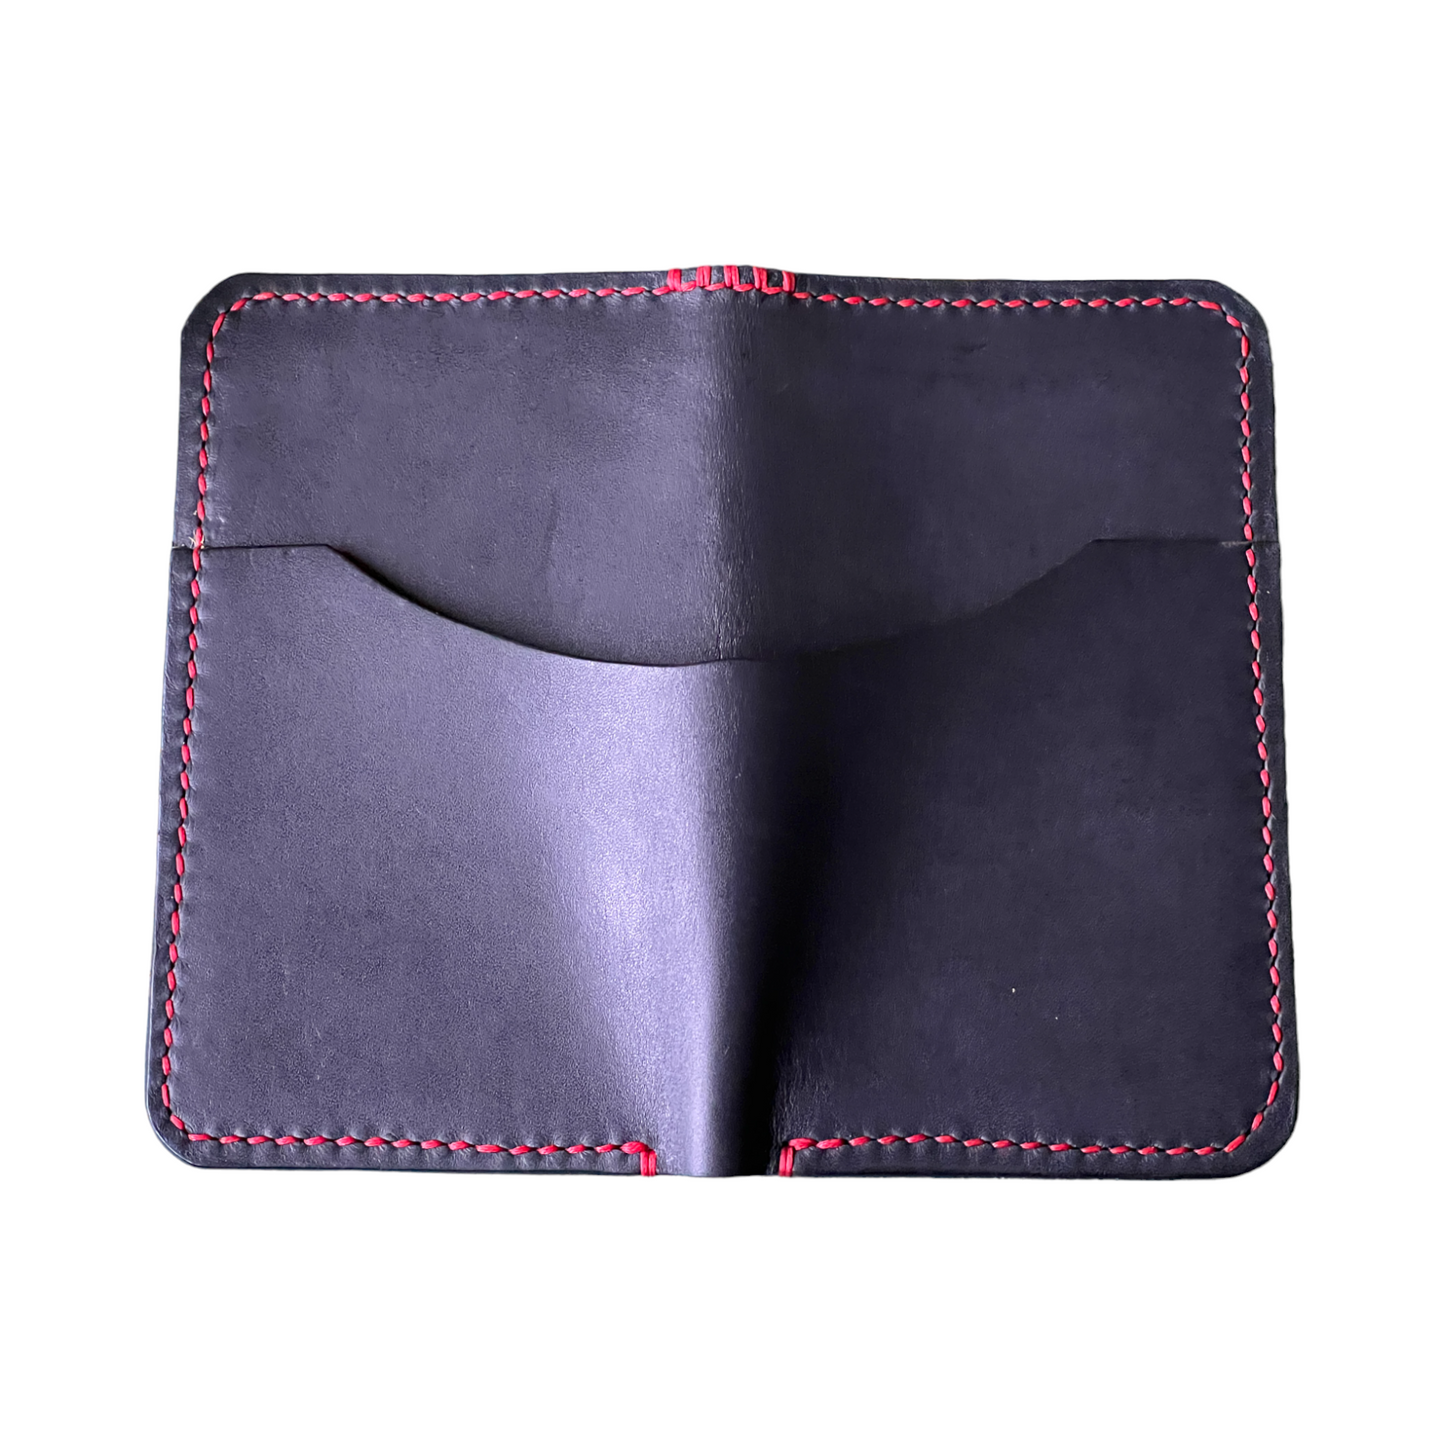 The Adalyn - Black Horween Dublin Red Oil Inserts Red Stitching